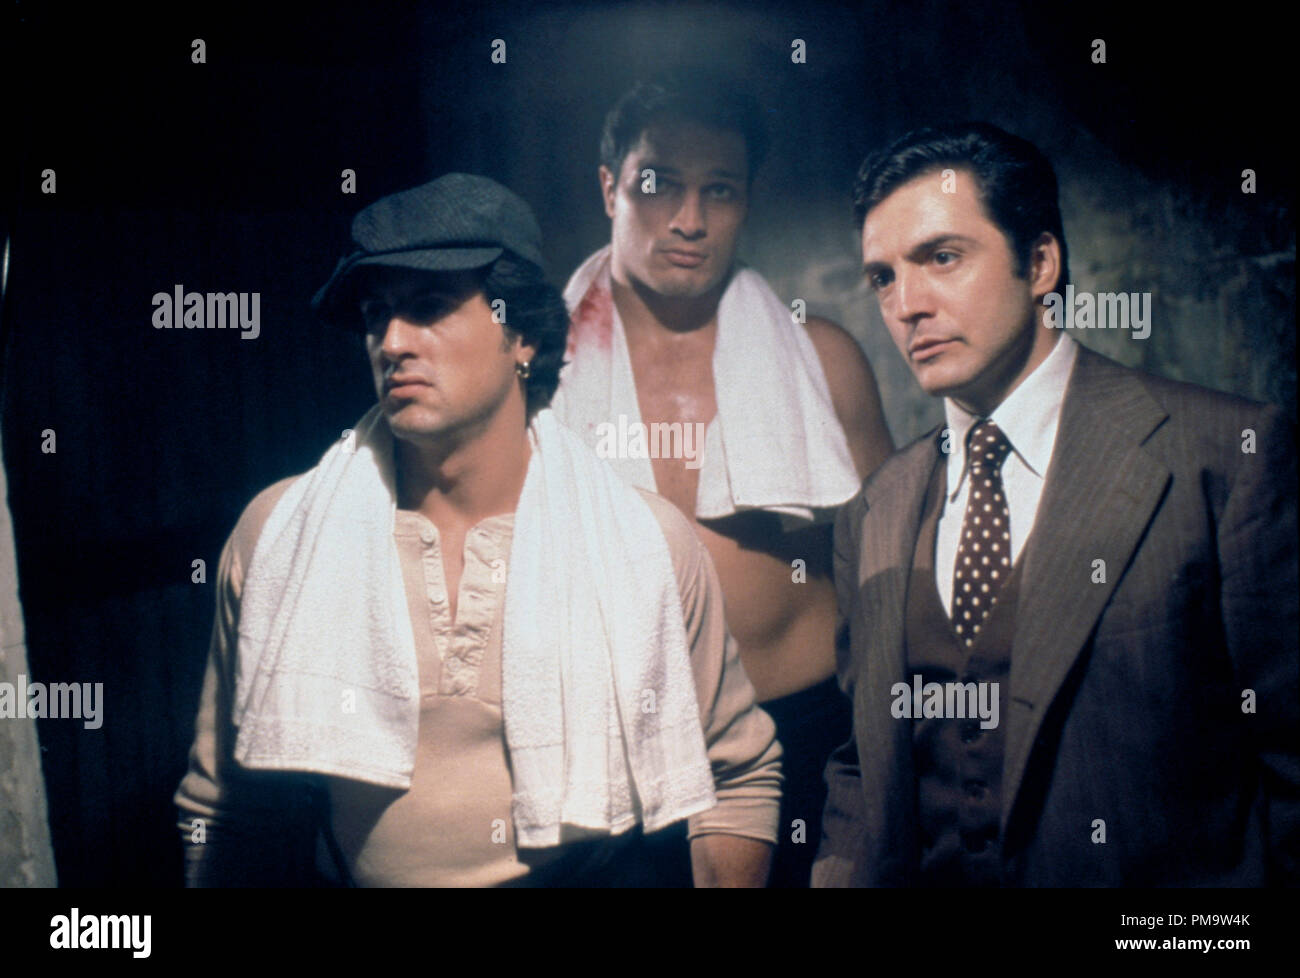 Studio Publicity Still from 'Paradise Alley' Sylvester Stallone, Lee Canalito, Armand Assante © 1978 Universal    All Rights Reserved   File Reference # 31720114THA  For Editorial Use Only Stock Photo